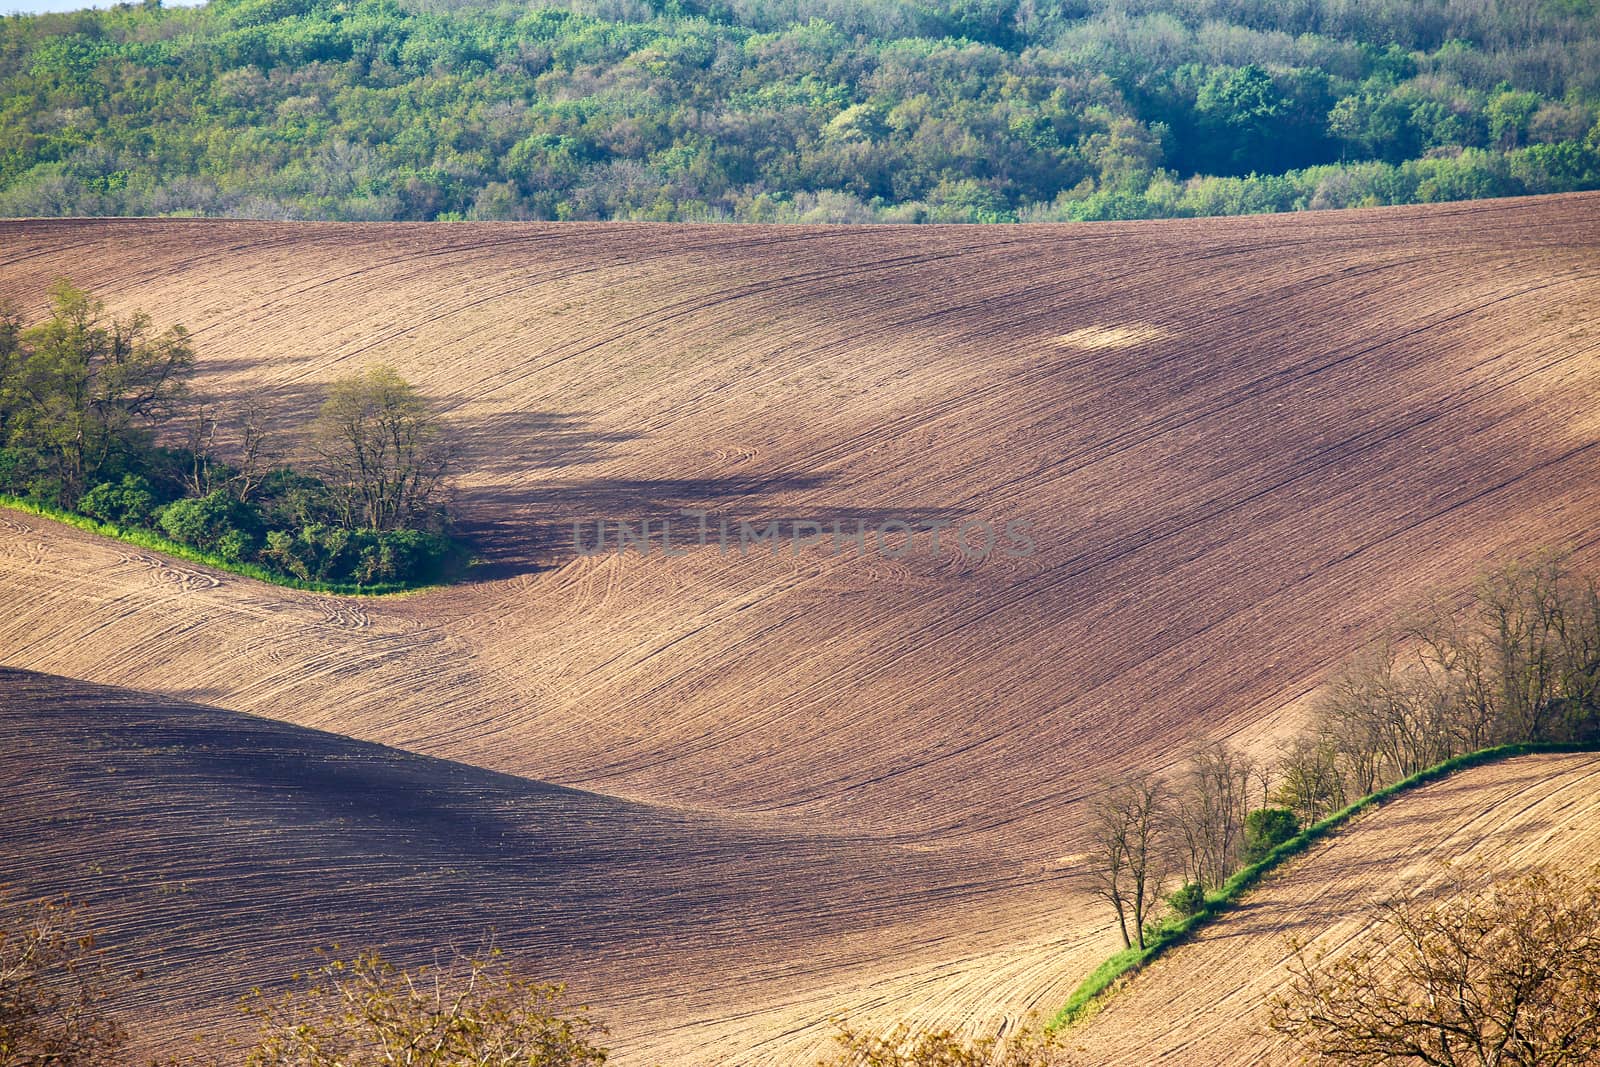 Spring arable land. Spring wavy agriculture scene. Rural landsca by weise_maxim